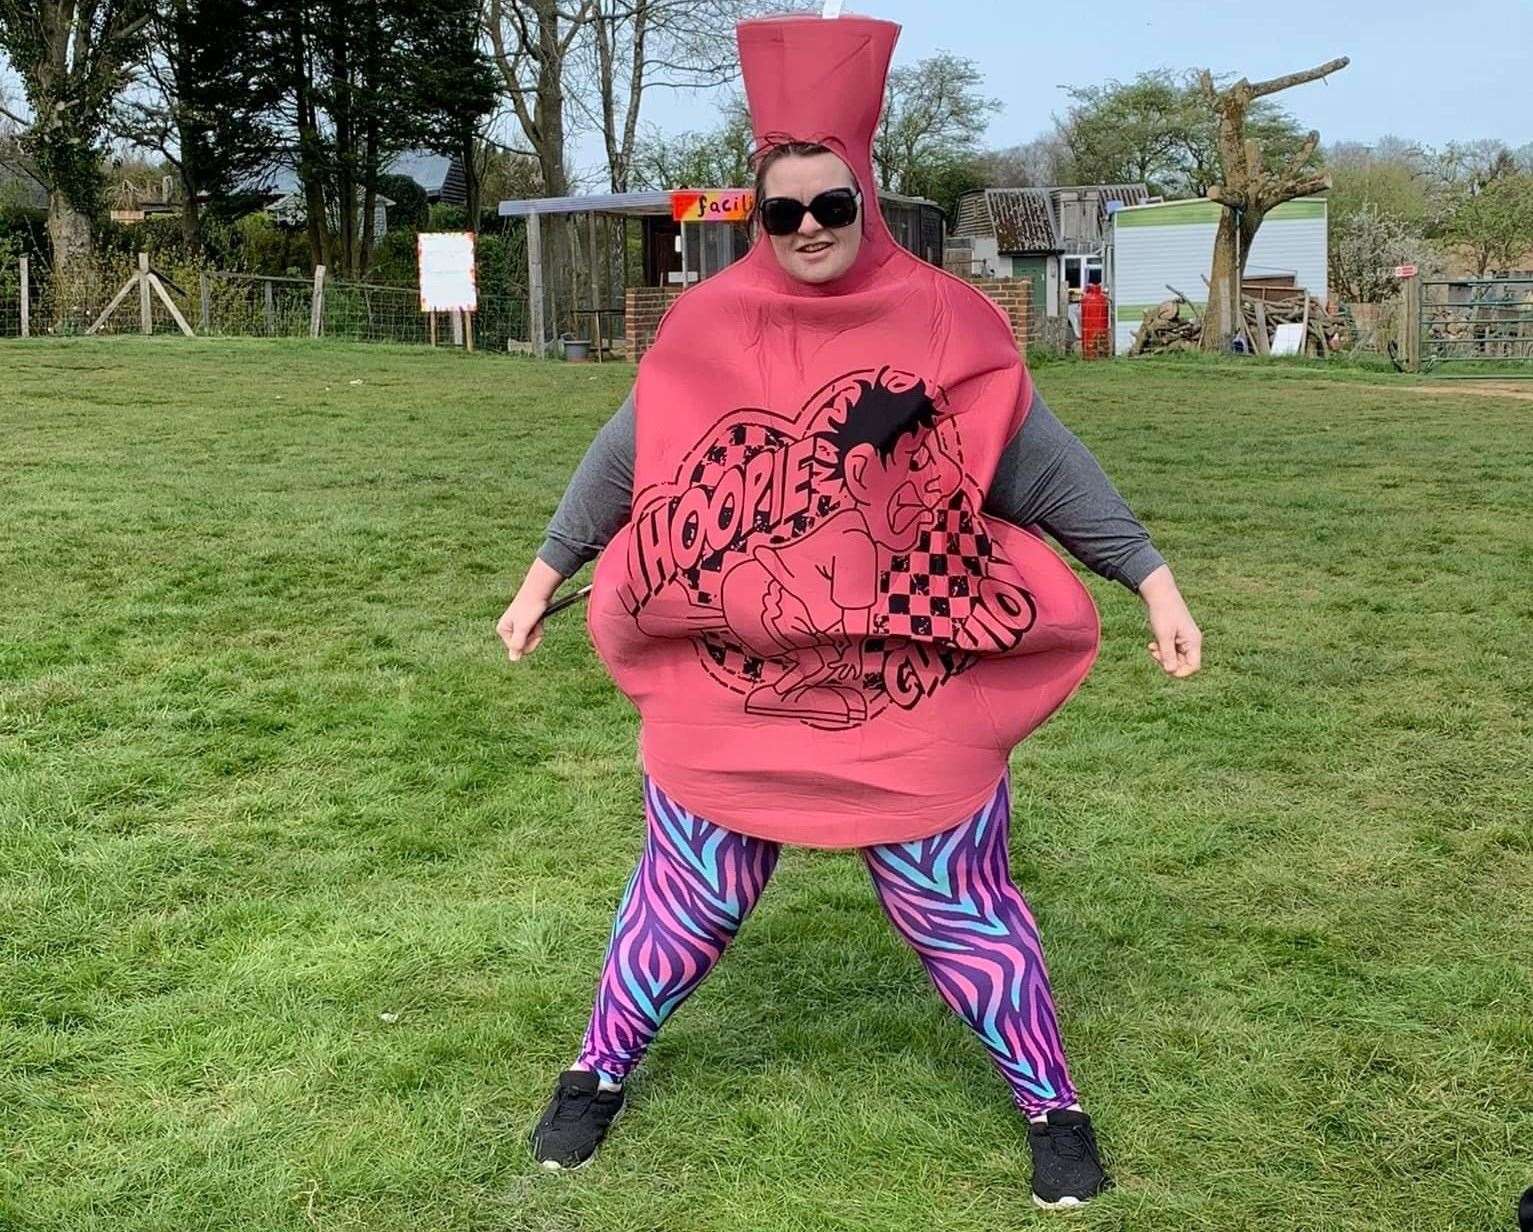 Kellie Milano dressed as a whoopee cushion